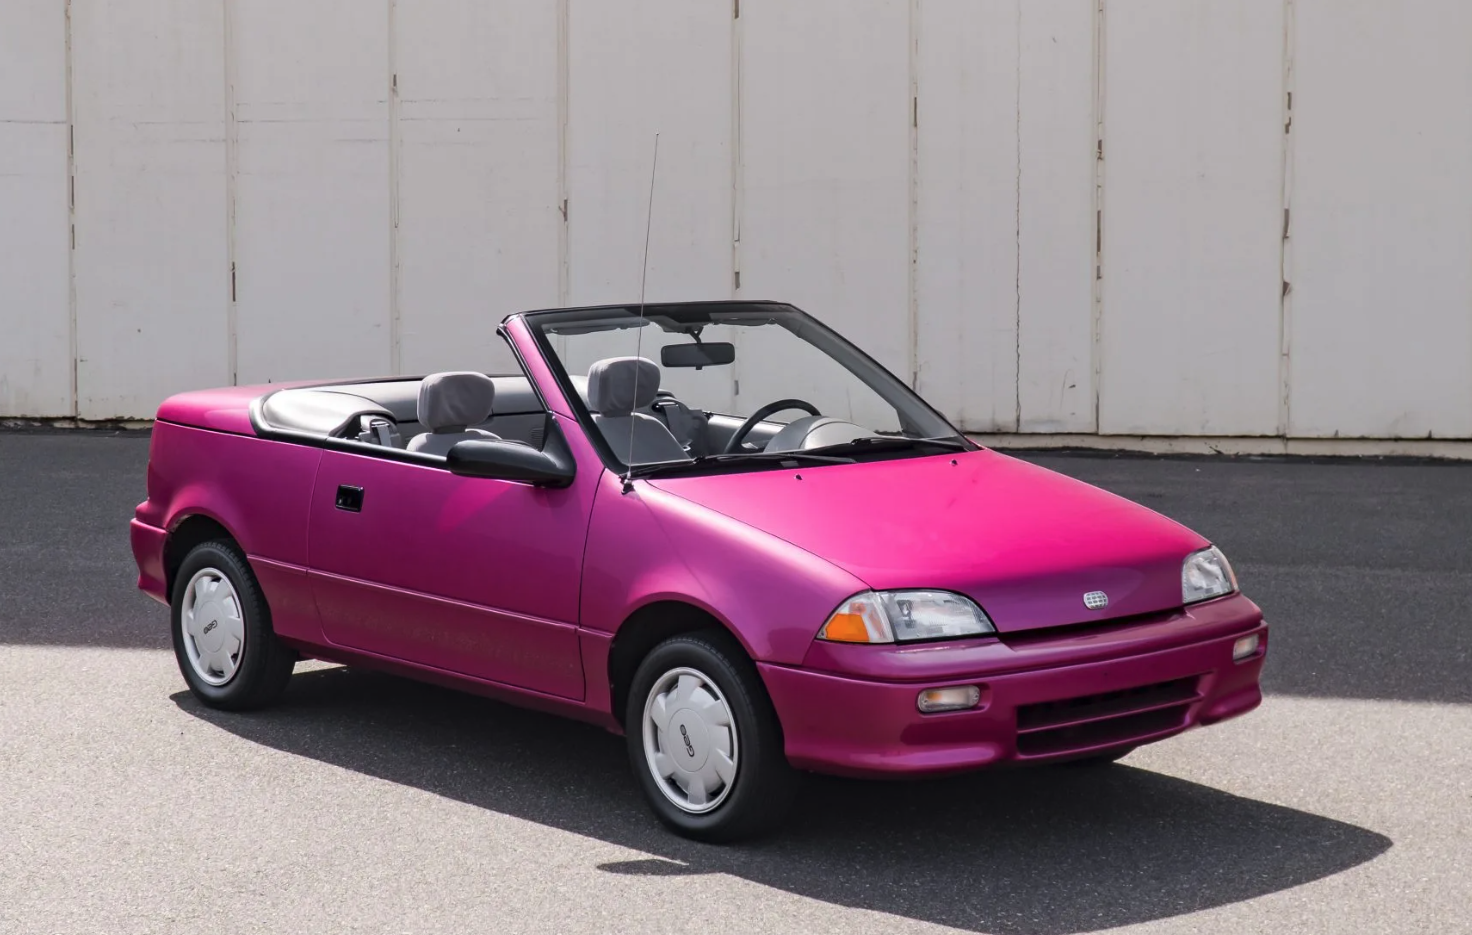 1993 Geo Metro Convertible Is Our Bring a Trailer Auction Pick